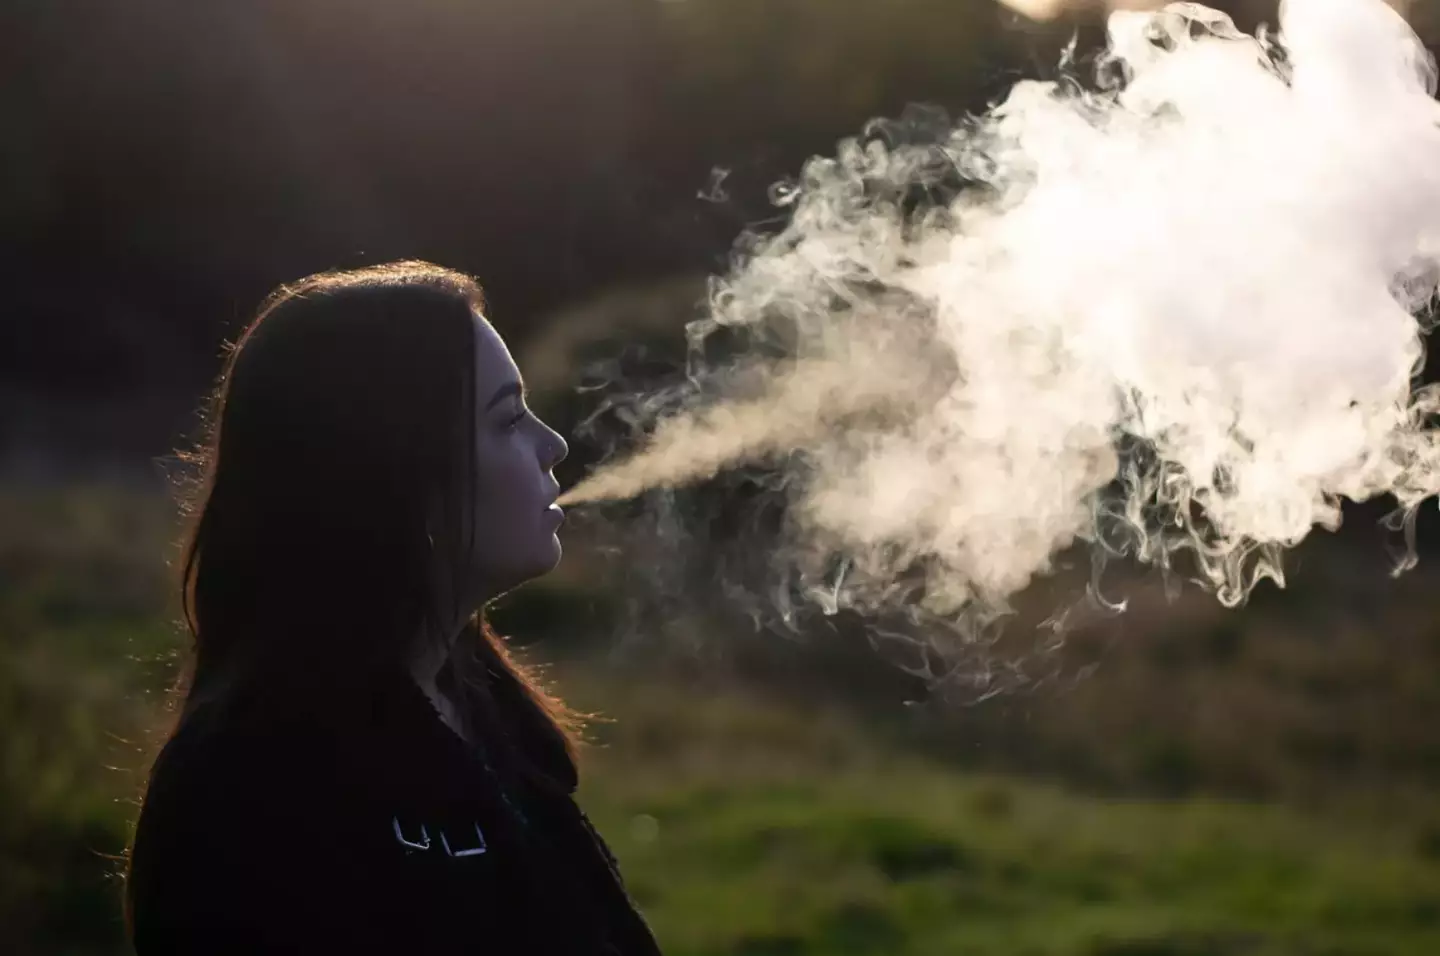 Vaping is very popular among teenagers, but there are lot of harmful chemicals in them.